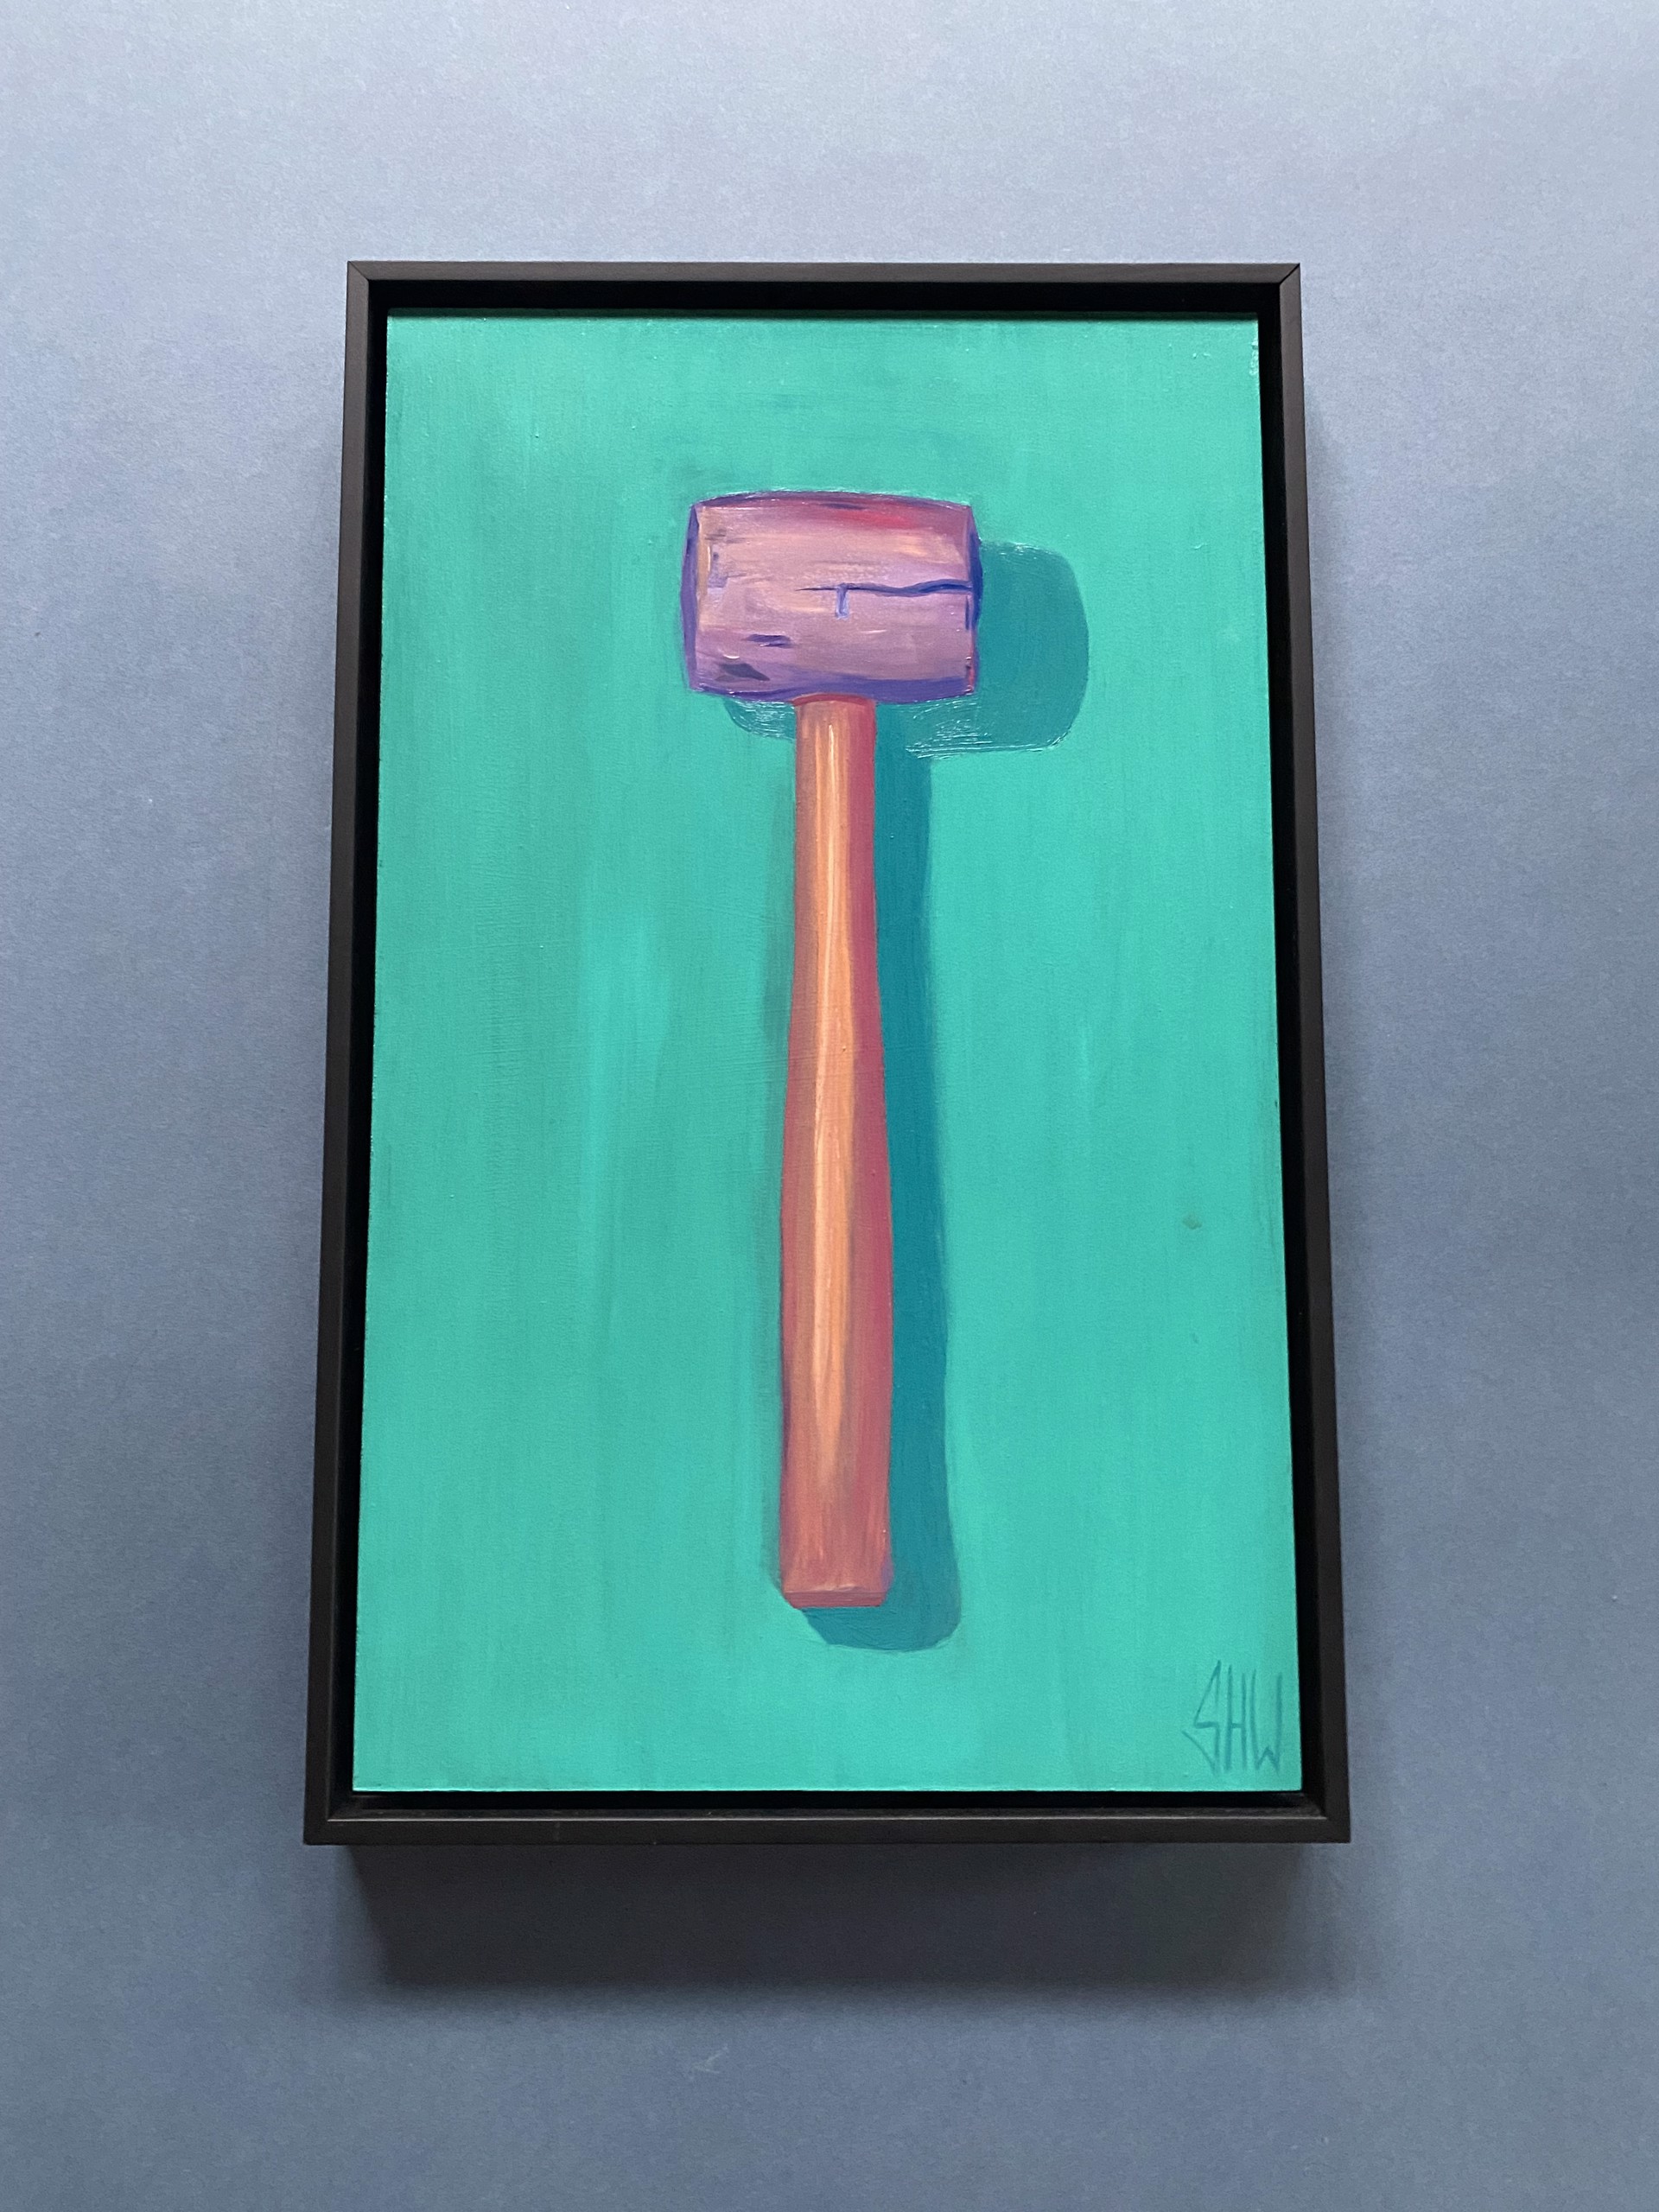 Tool No. 17 (The Good Mallet) by Stephen Wells